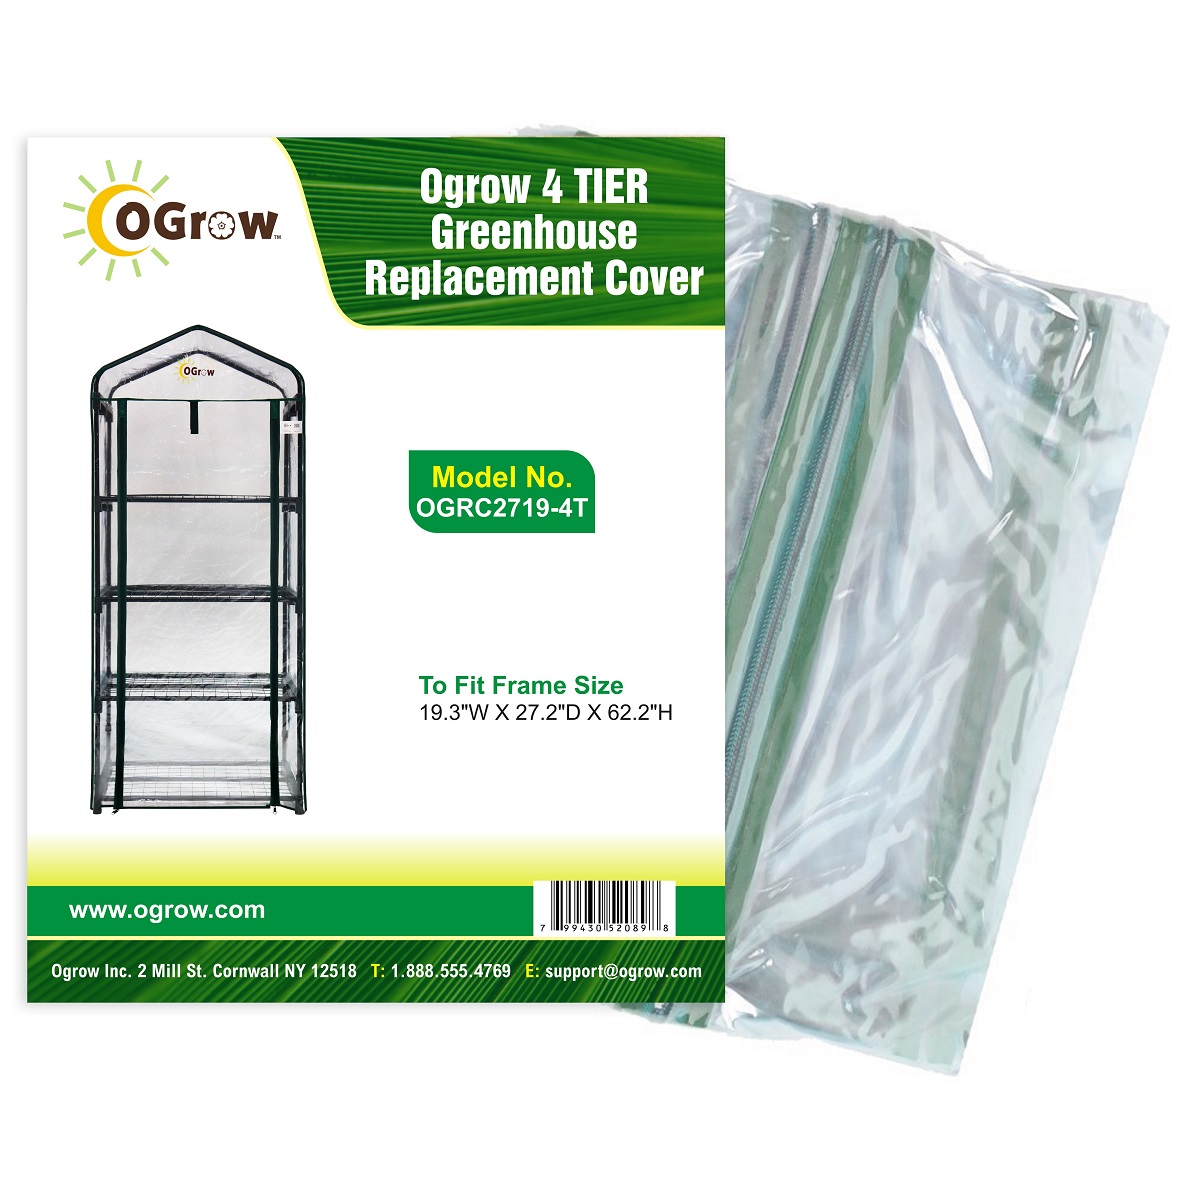 oGrow OGRC2719-4T 4 TIER Greenhouse Replacement Cover - To Fit Frame Size  19.3"W X 27.2"D X 62.2"H